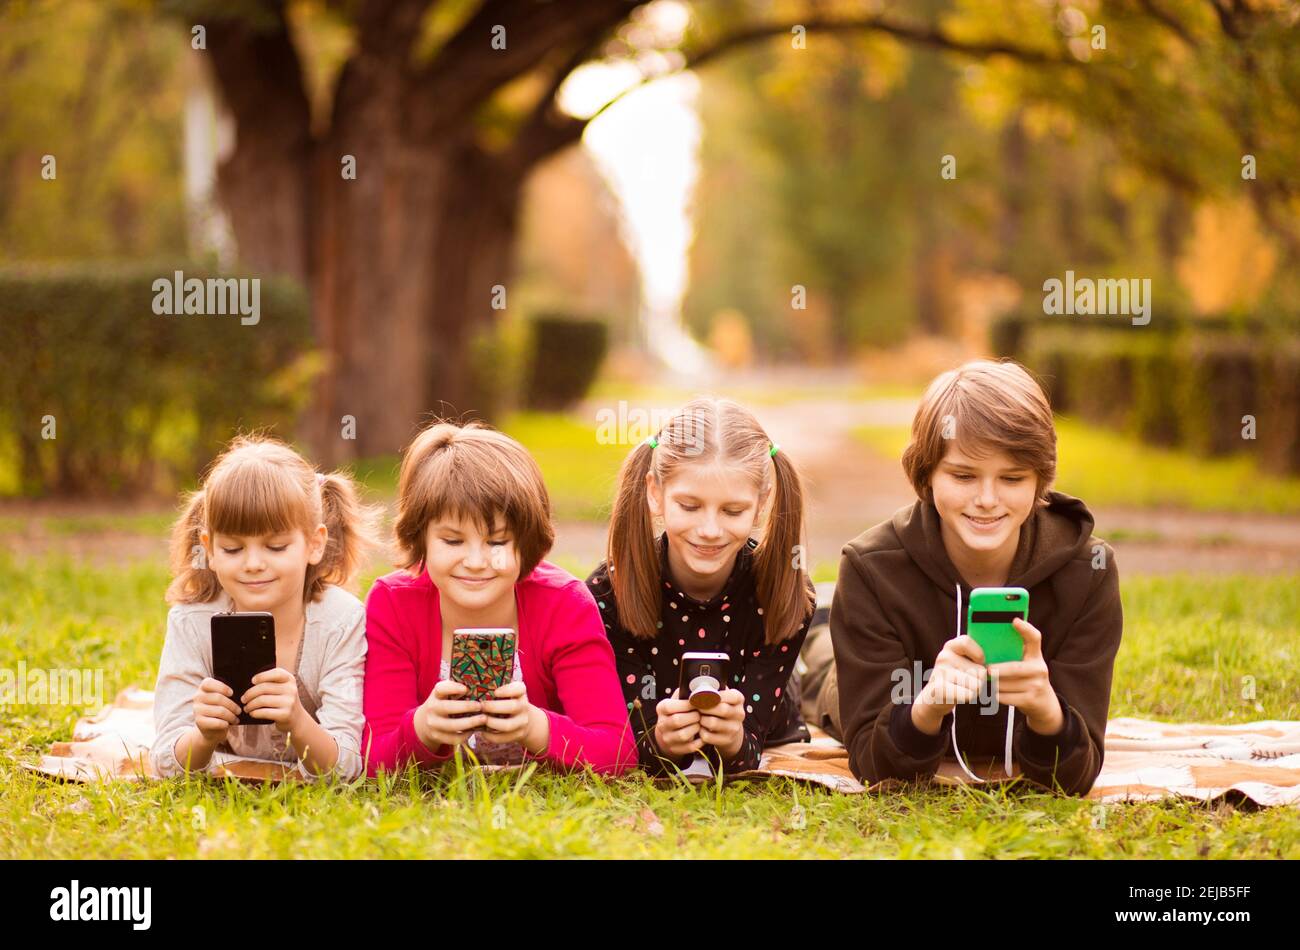 Smartphone addiction group of little children watching film movie cartoon together on digital tablet. Kids playing with phone together Stock Photo